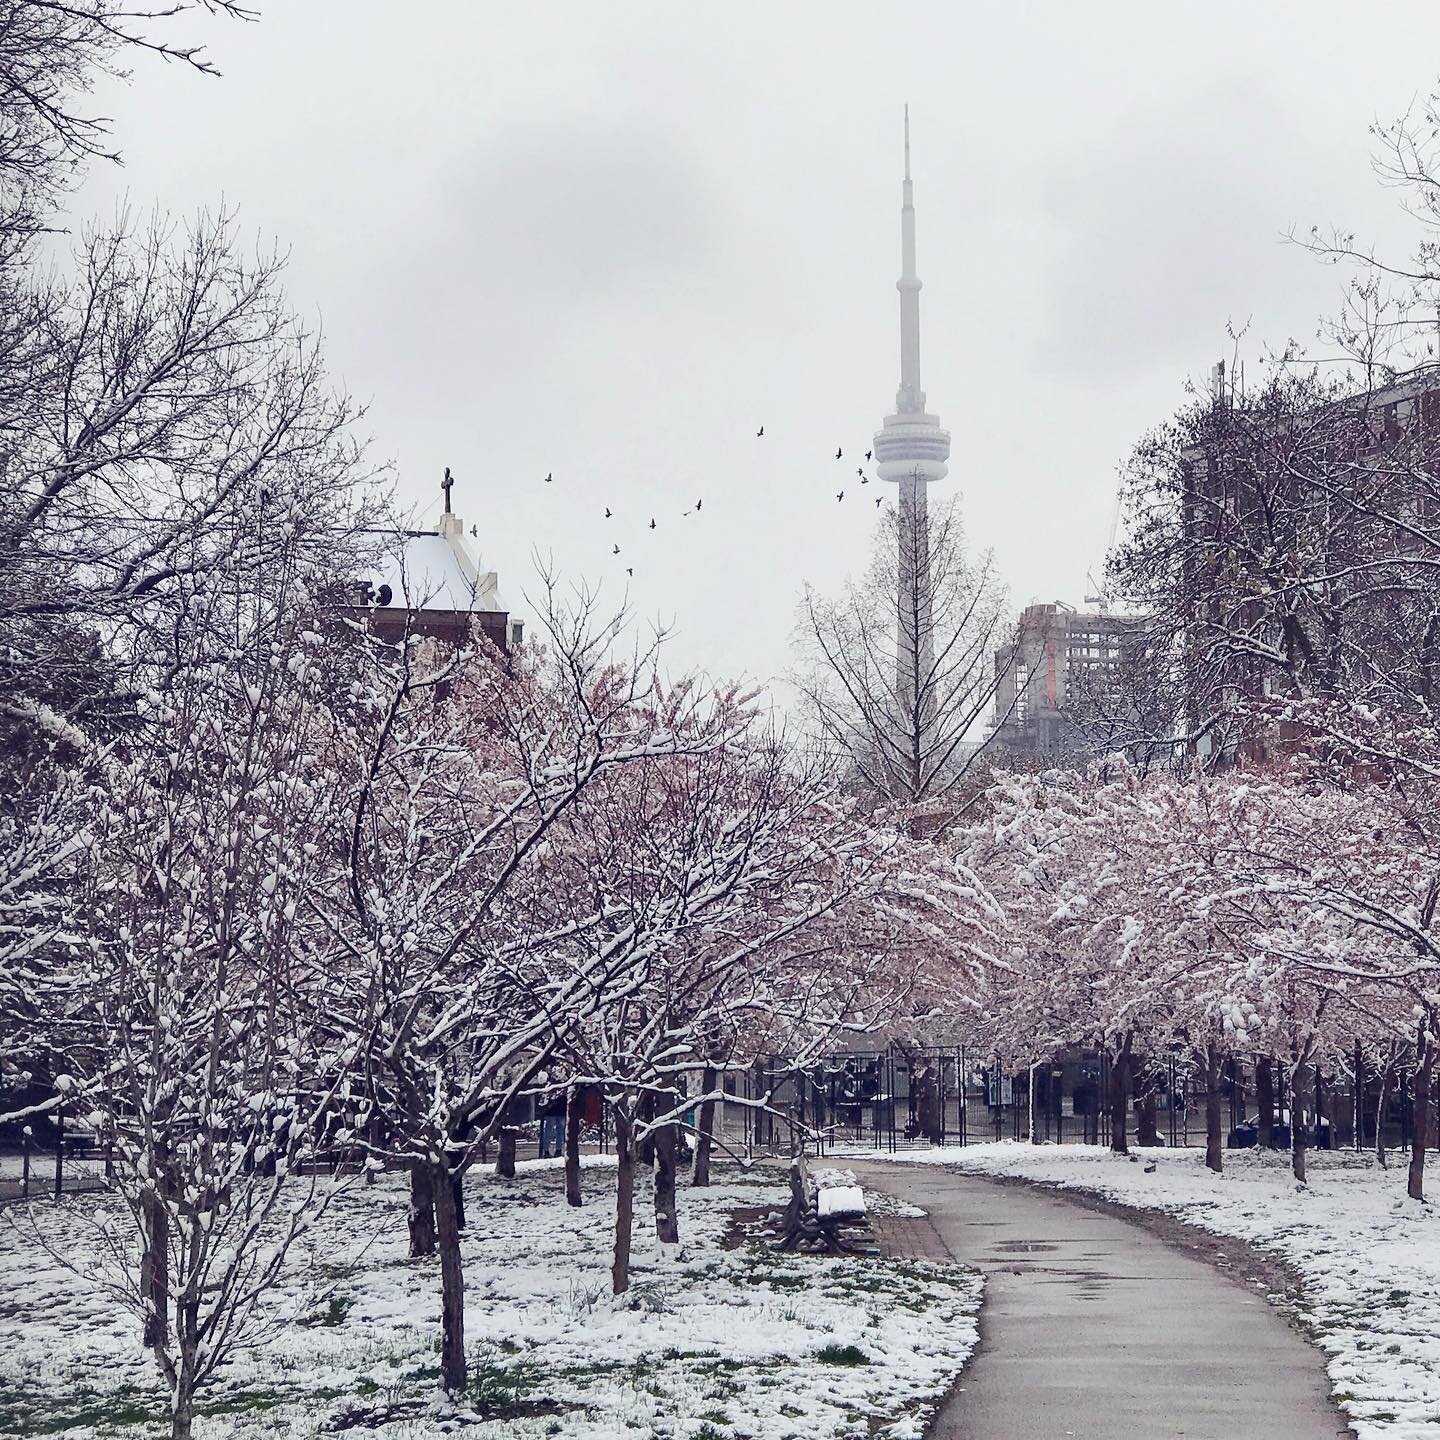 It&rsquo;s just not April in Toronto without a little snow ⛄️ 🇨🇦 
.
.
.
#torontocherryblossoms #cagedbeauty #trinitybellwoodspark